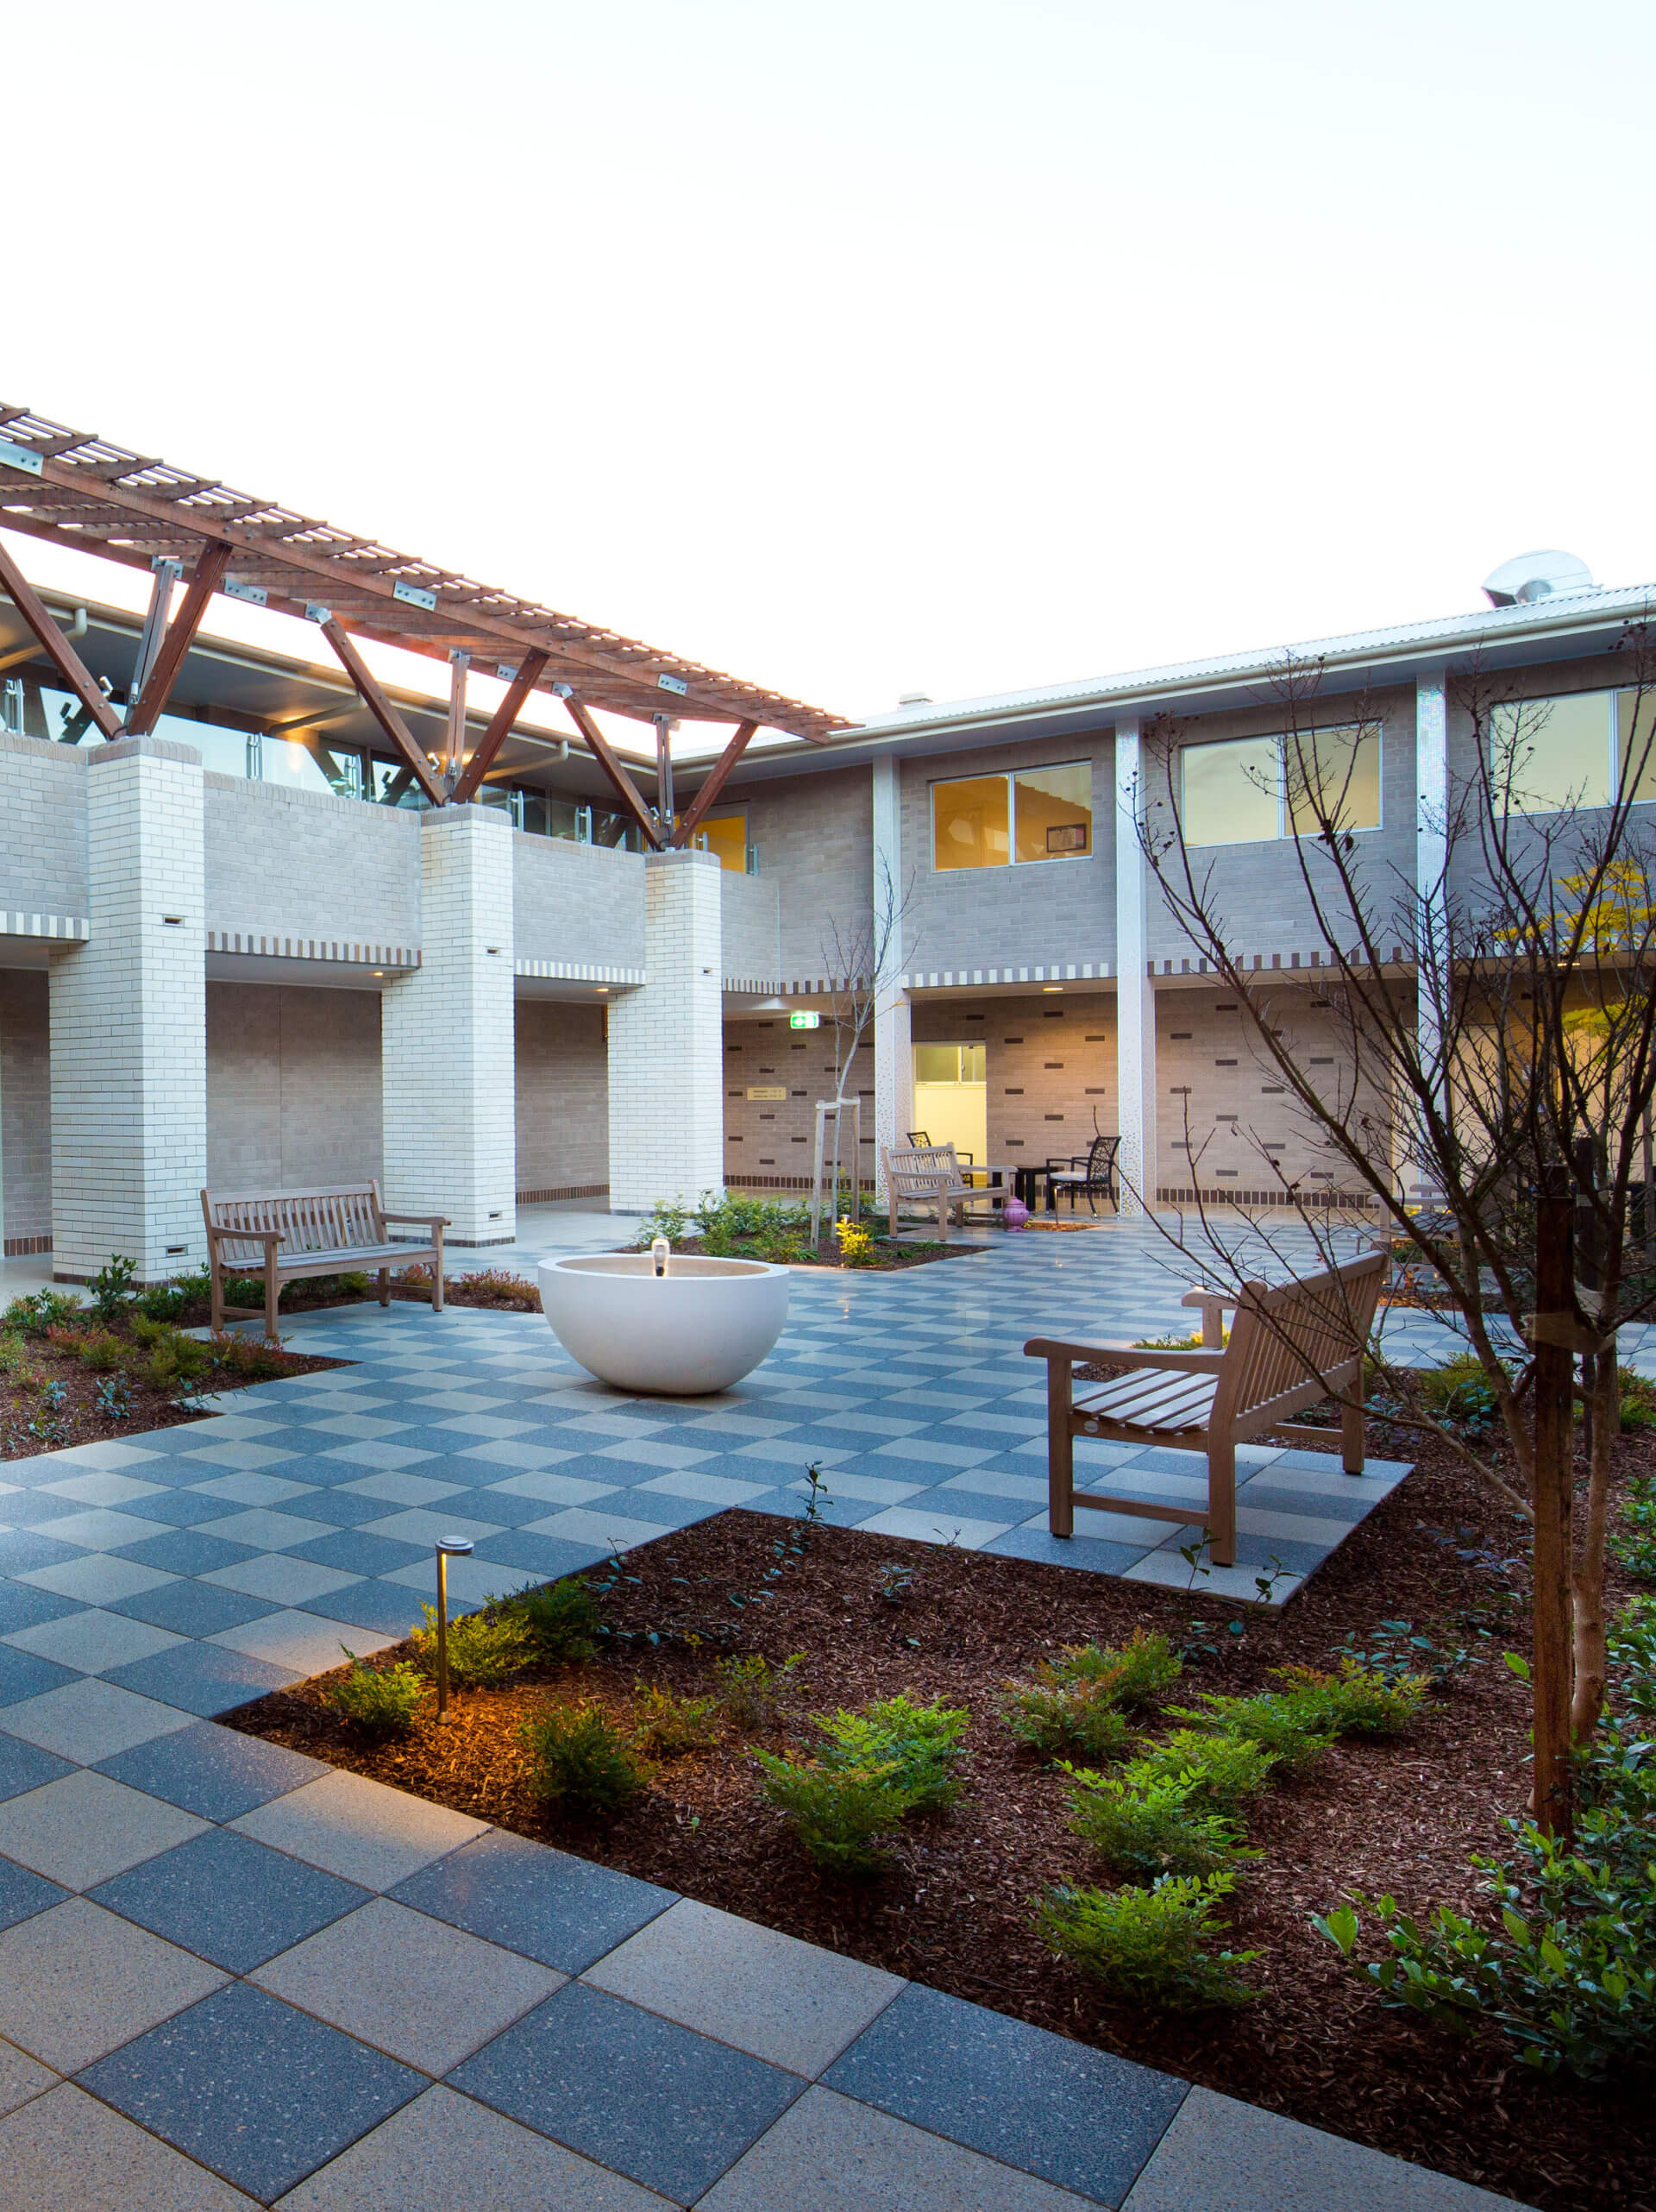 7 dusk courtyard bupa bankstown taylor construction health and aged care